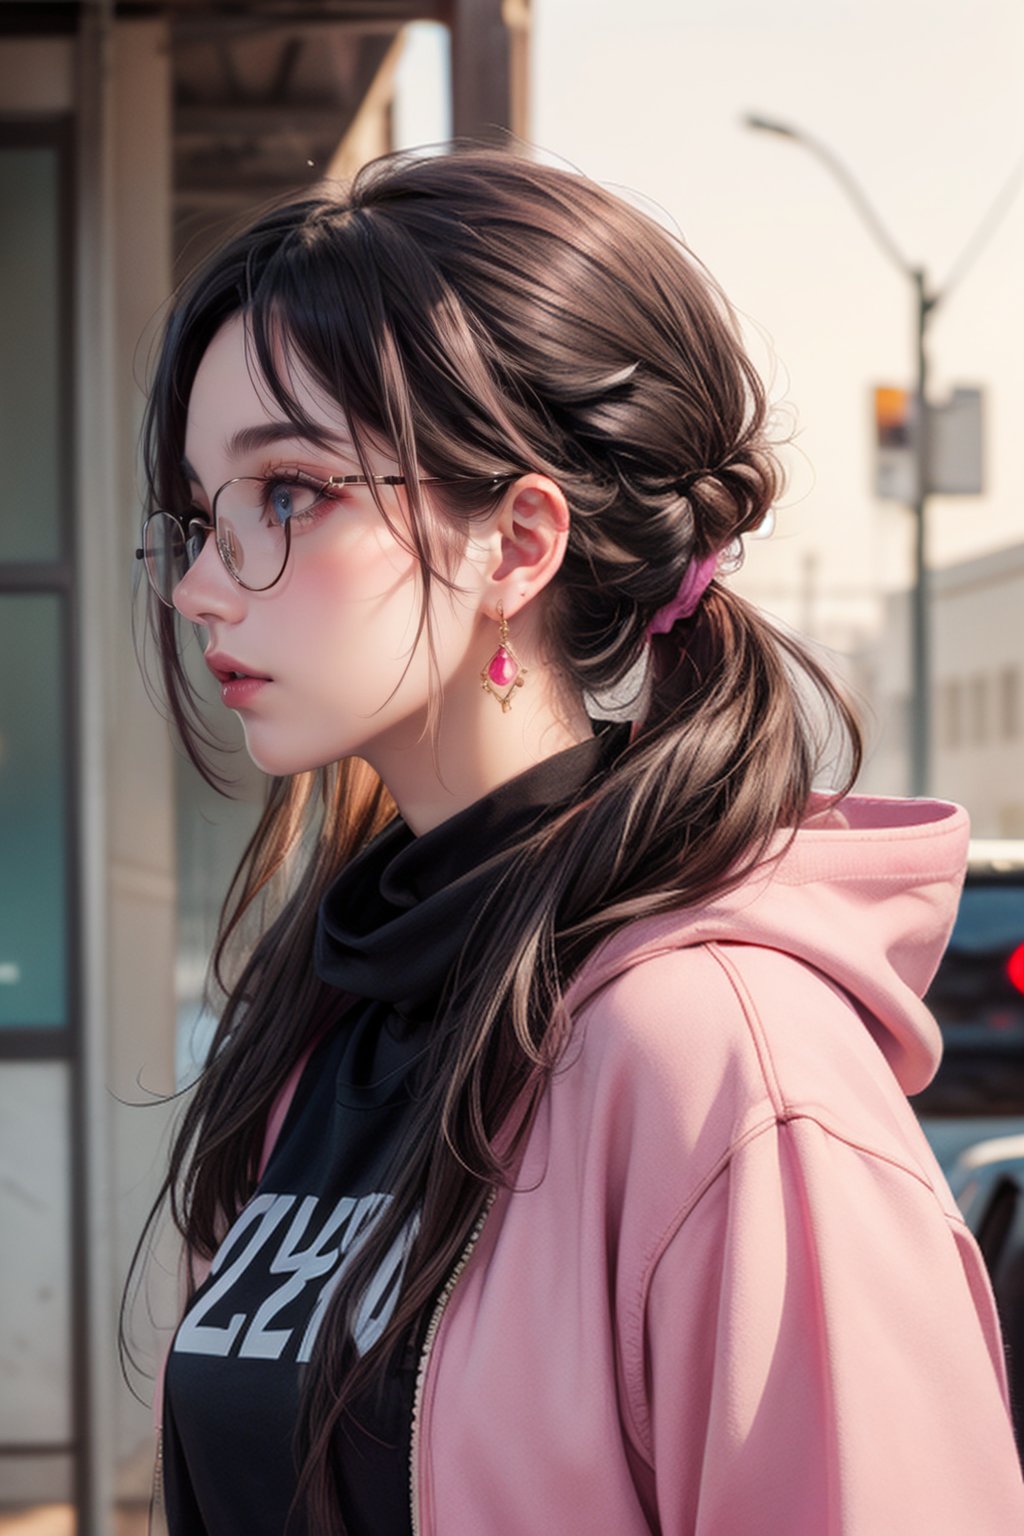 extra detailed, detailed anatomy, detailed face, detailed eyes, professional photography of beautiful 21 year old lady, black sweatshirt, glasses, distracted, in profile, hair mixed between black and pink,